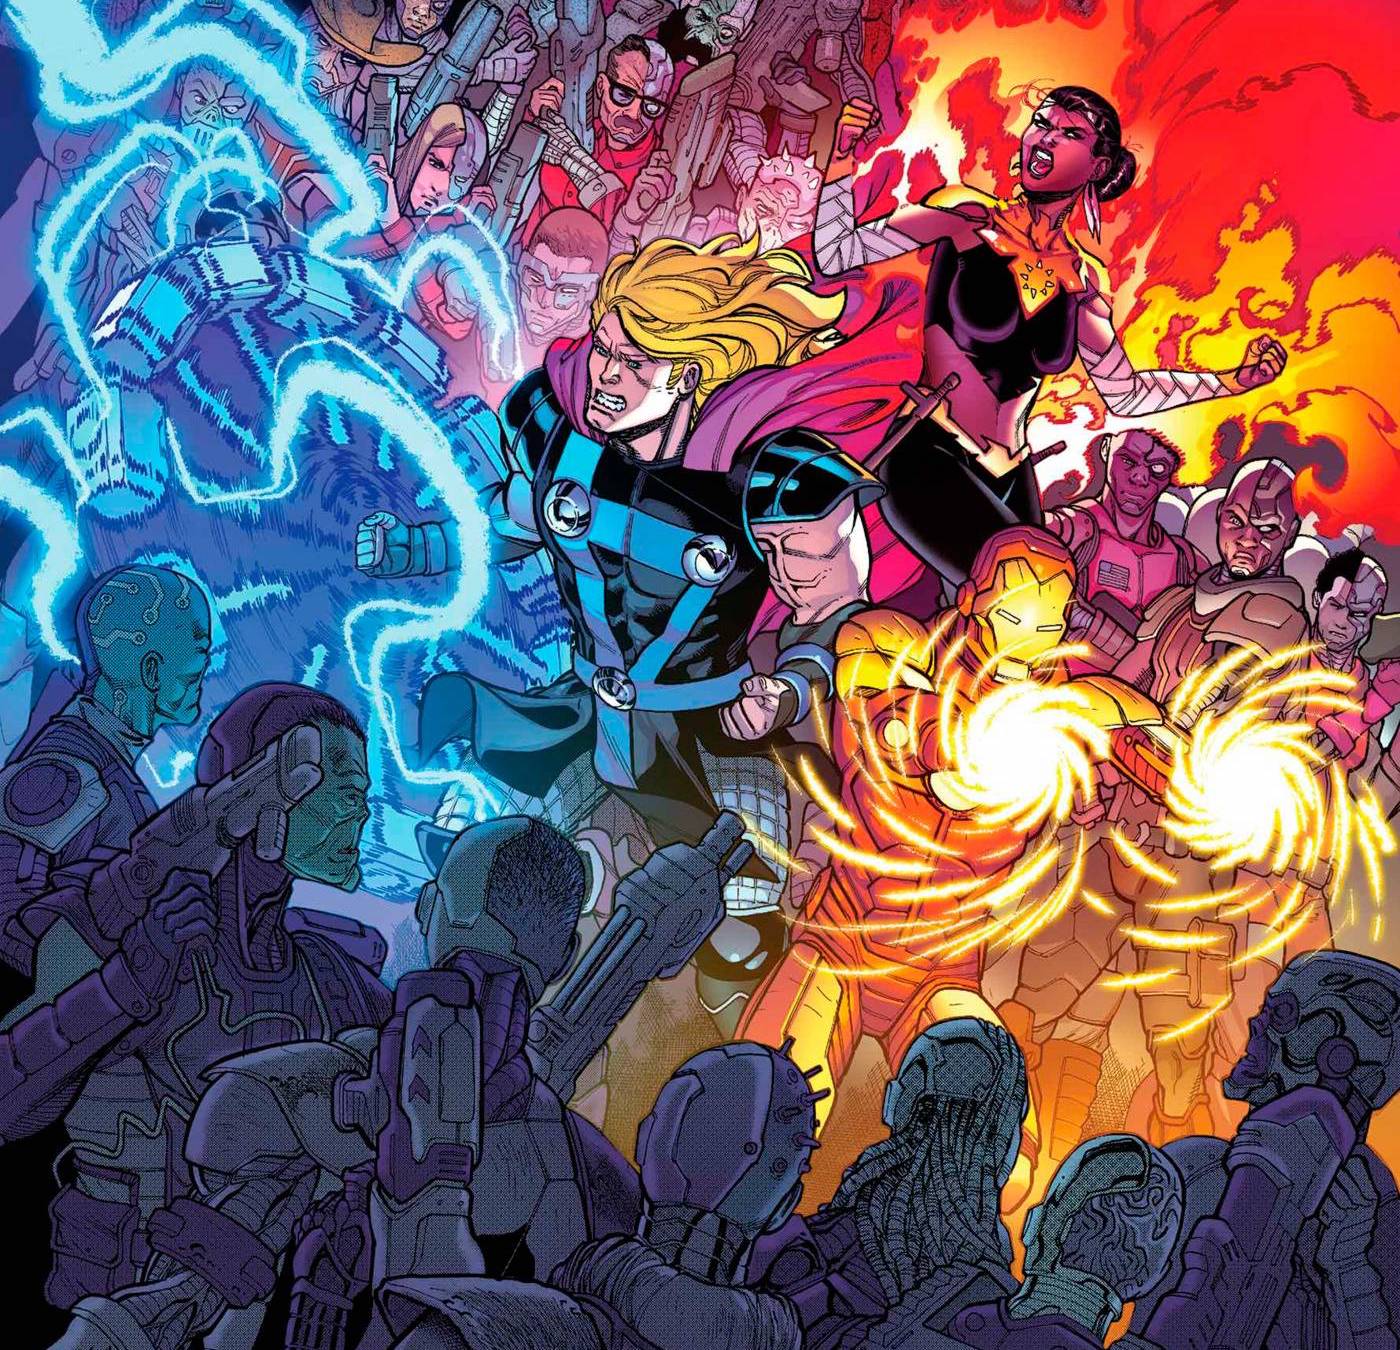 'The Avengers' #51 kicks off the multiverse battle of the ages